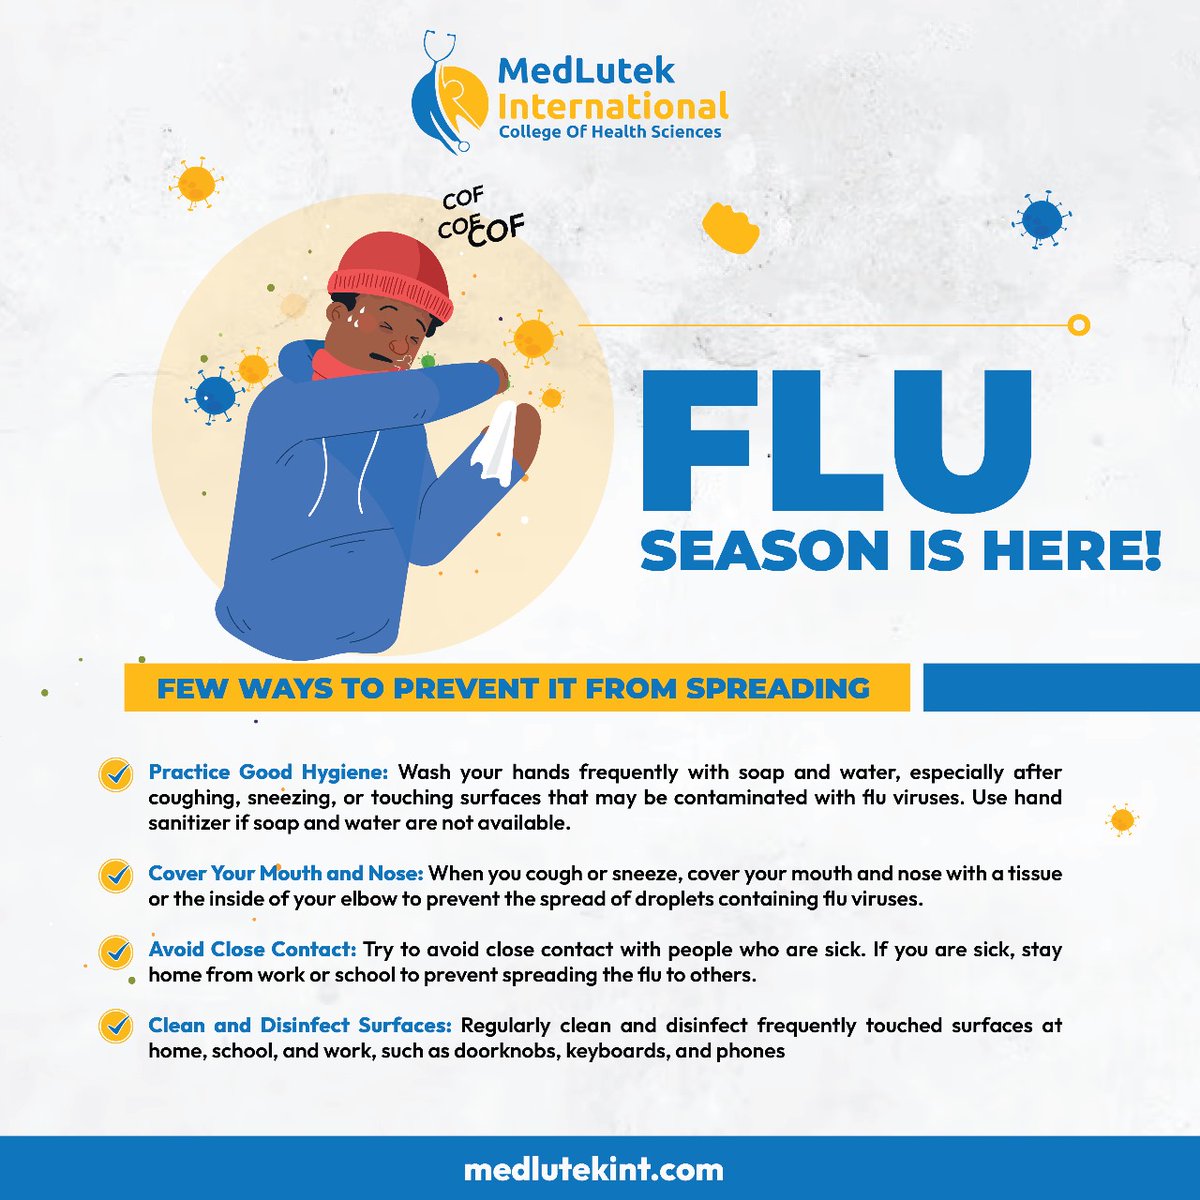 #Educationtuesday 🤒 Flu season is back! Keep it at bay with the following tips: 🧼 Wash hands frequently. 🤧 Cover coughs and sneezes. 🏡 Stay home if sick. Let's stay healthy together! #Medlutekcares #FluPrevention #StaySafe